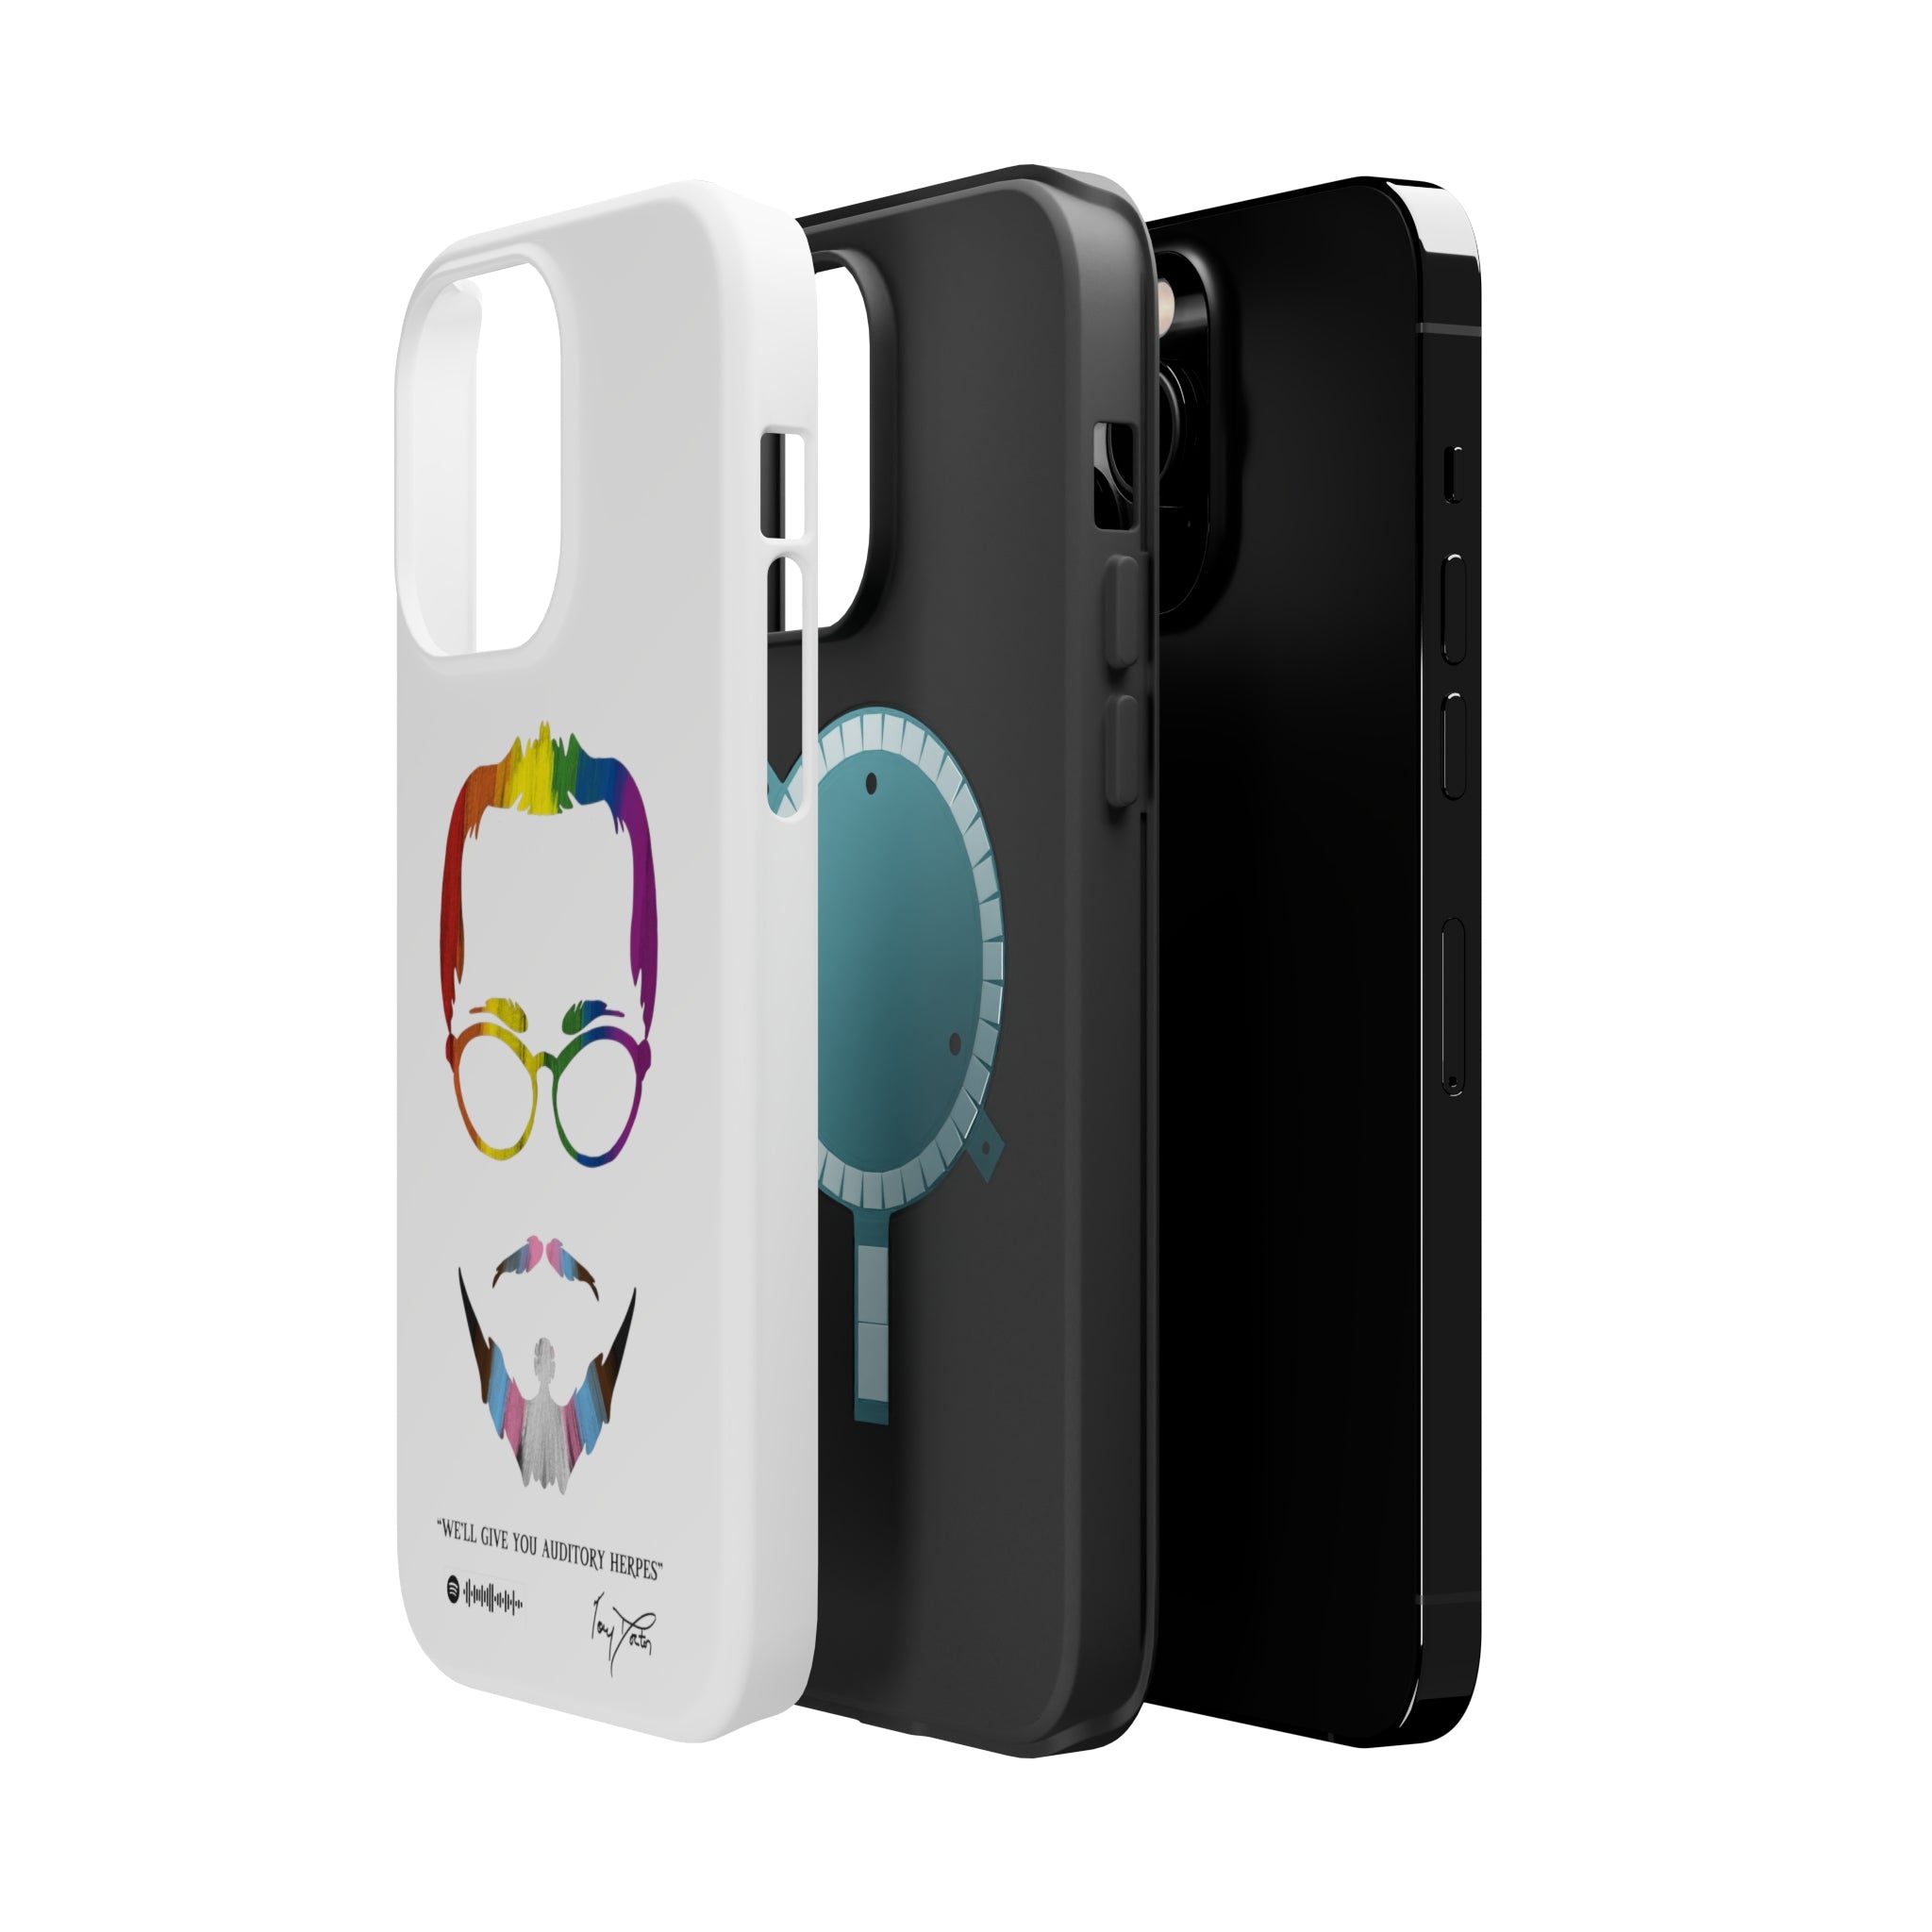 Tory Doctor's "Auditory Herpes" MagSafe Tough iPhone Case - LGBTQIA+ (White Background)